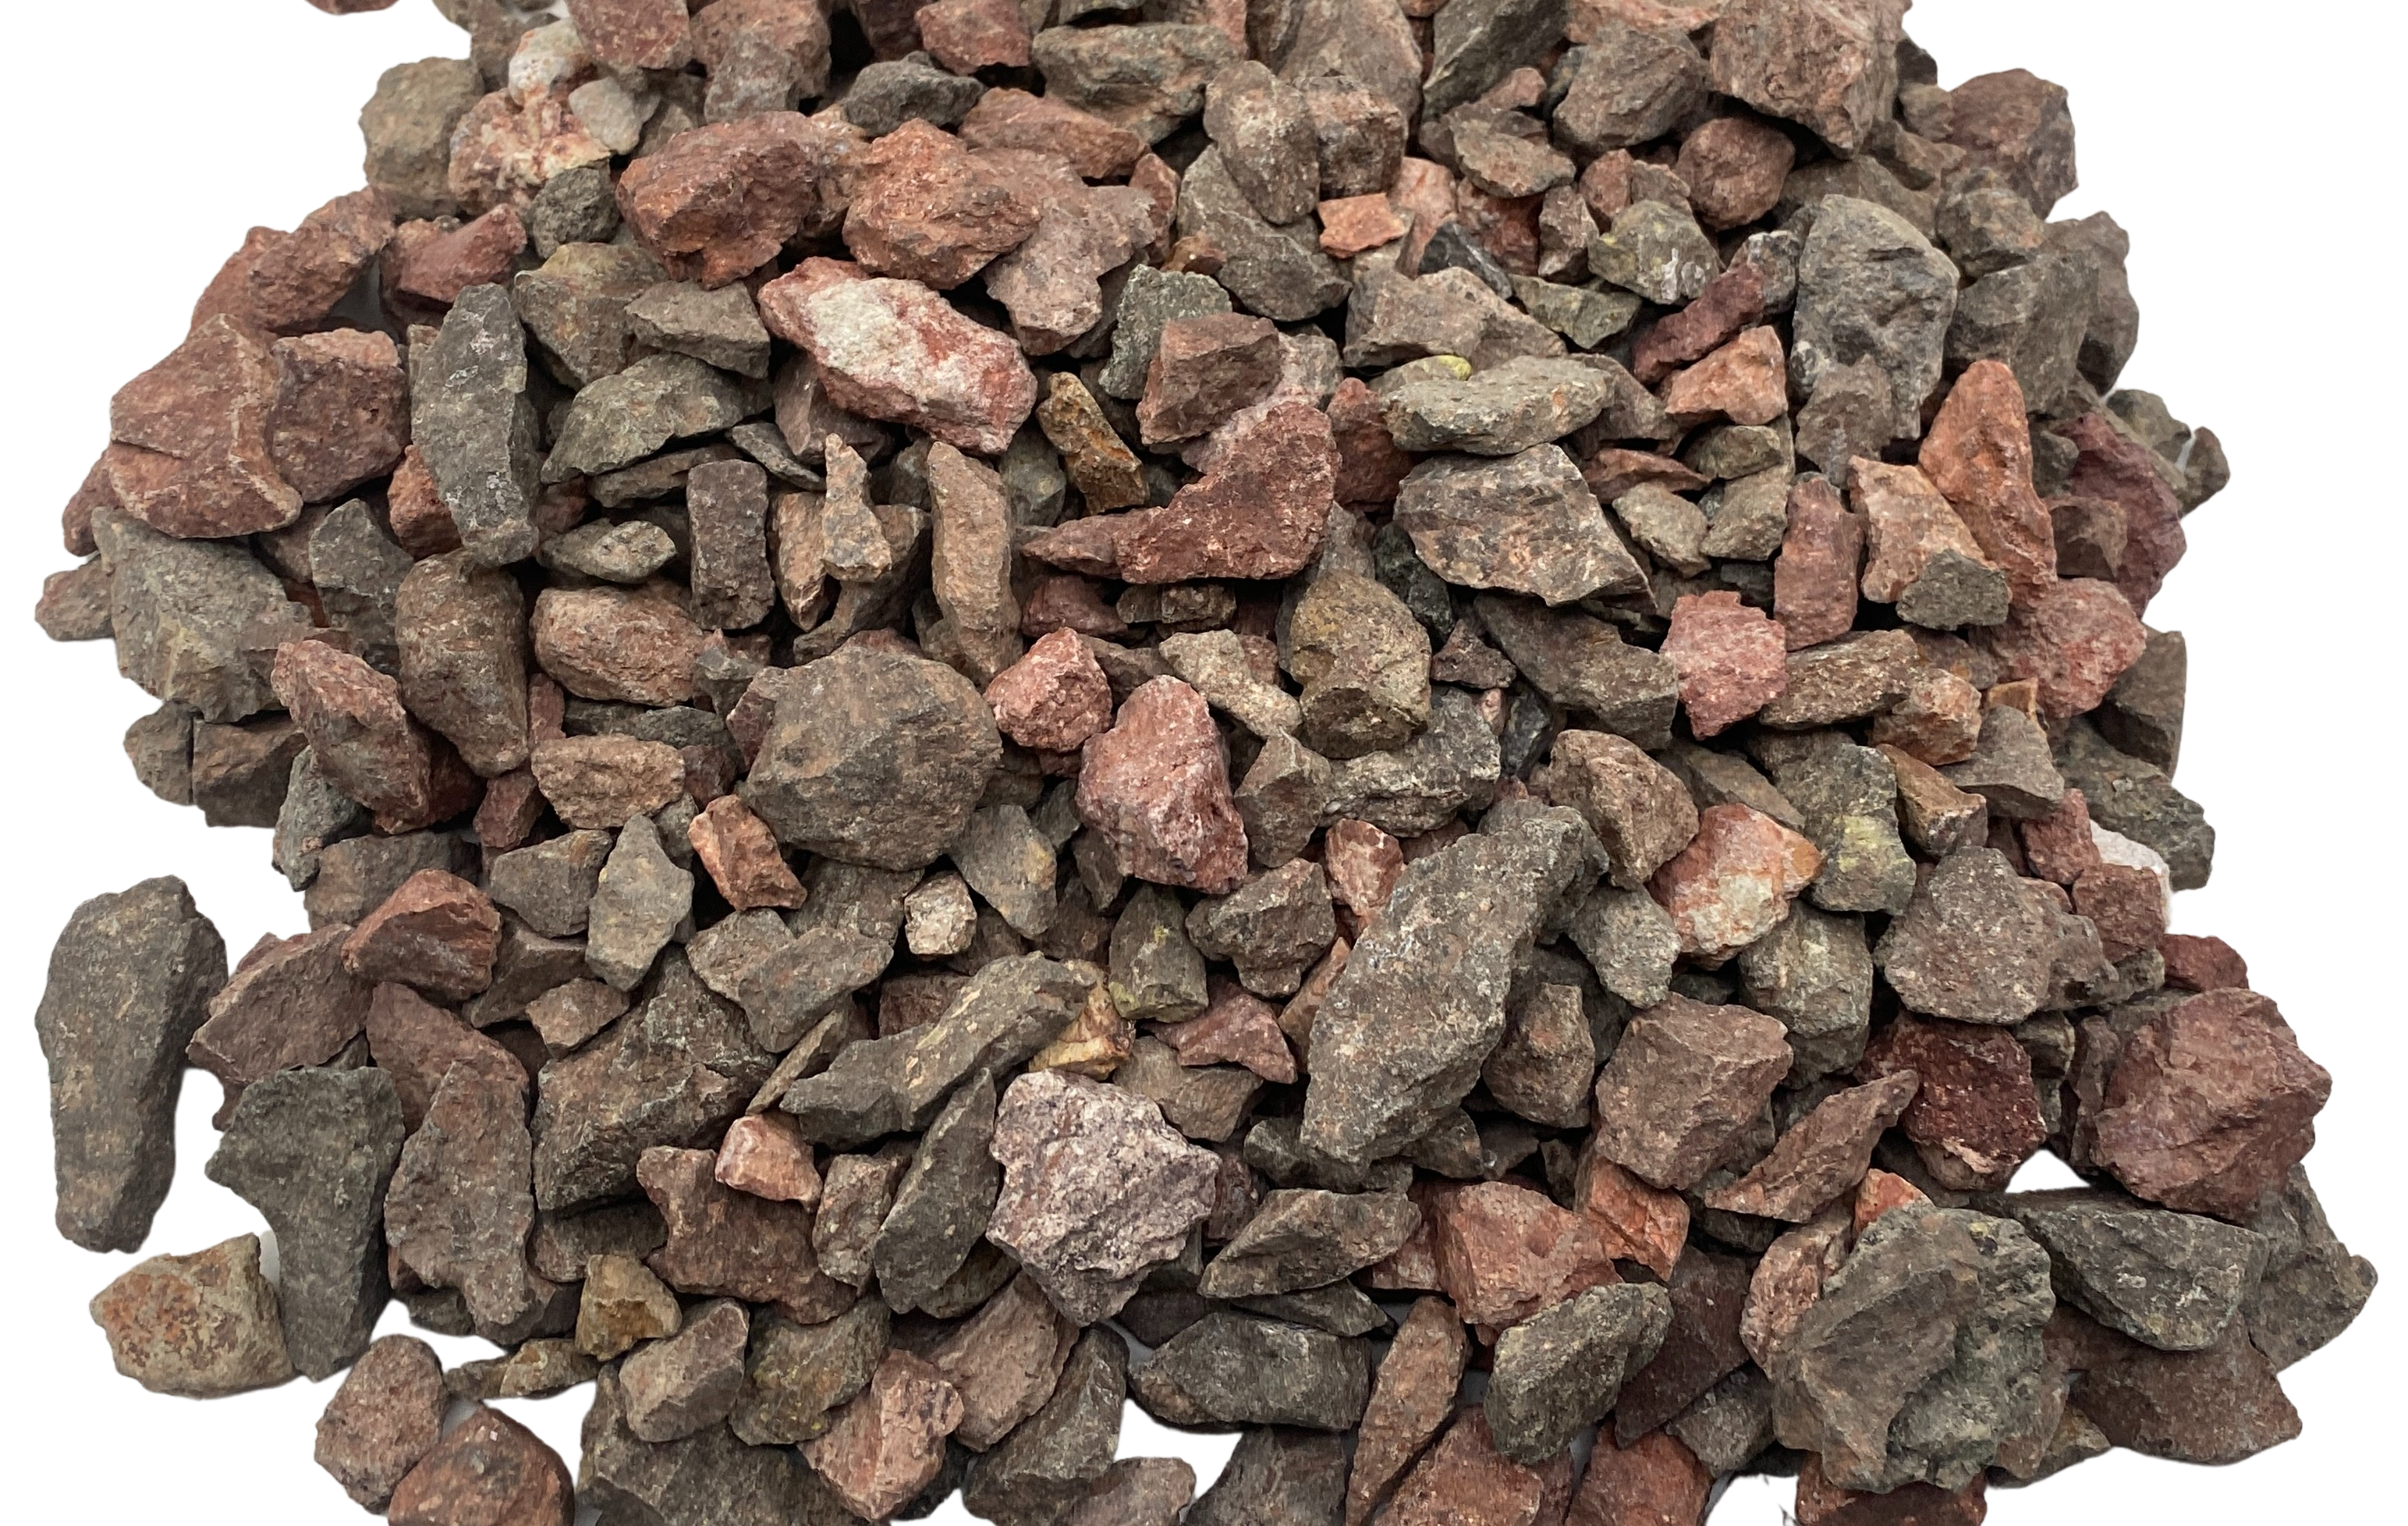 1/2" Screened Apache Red Decorative Landscaping Gravel Rocks